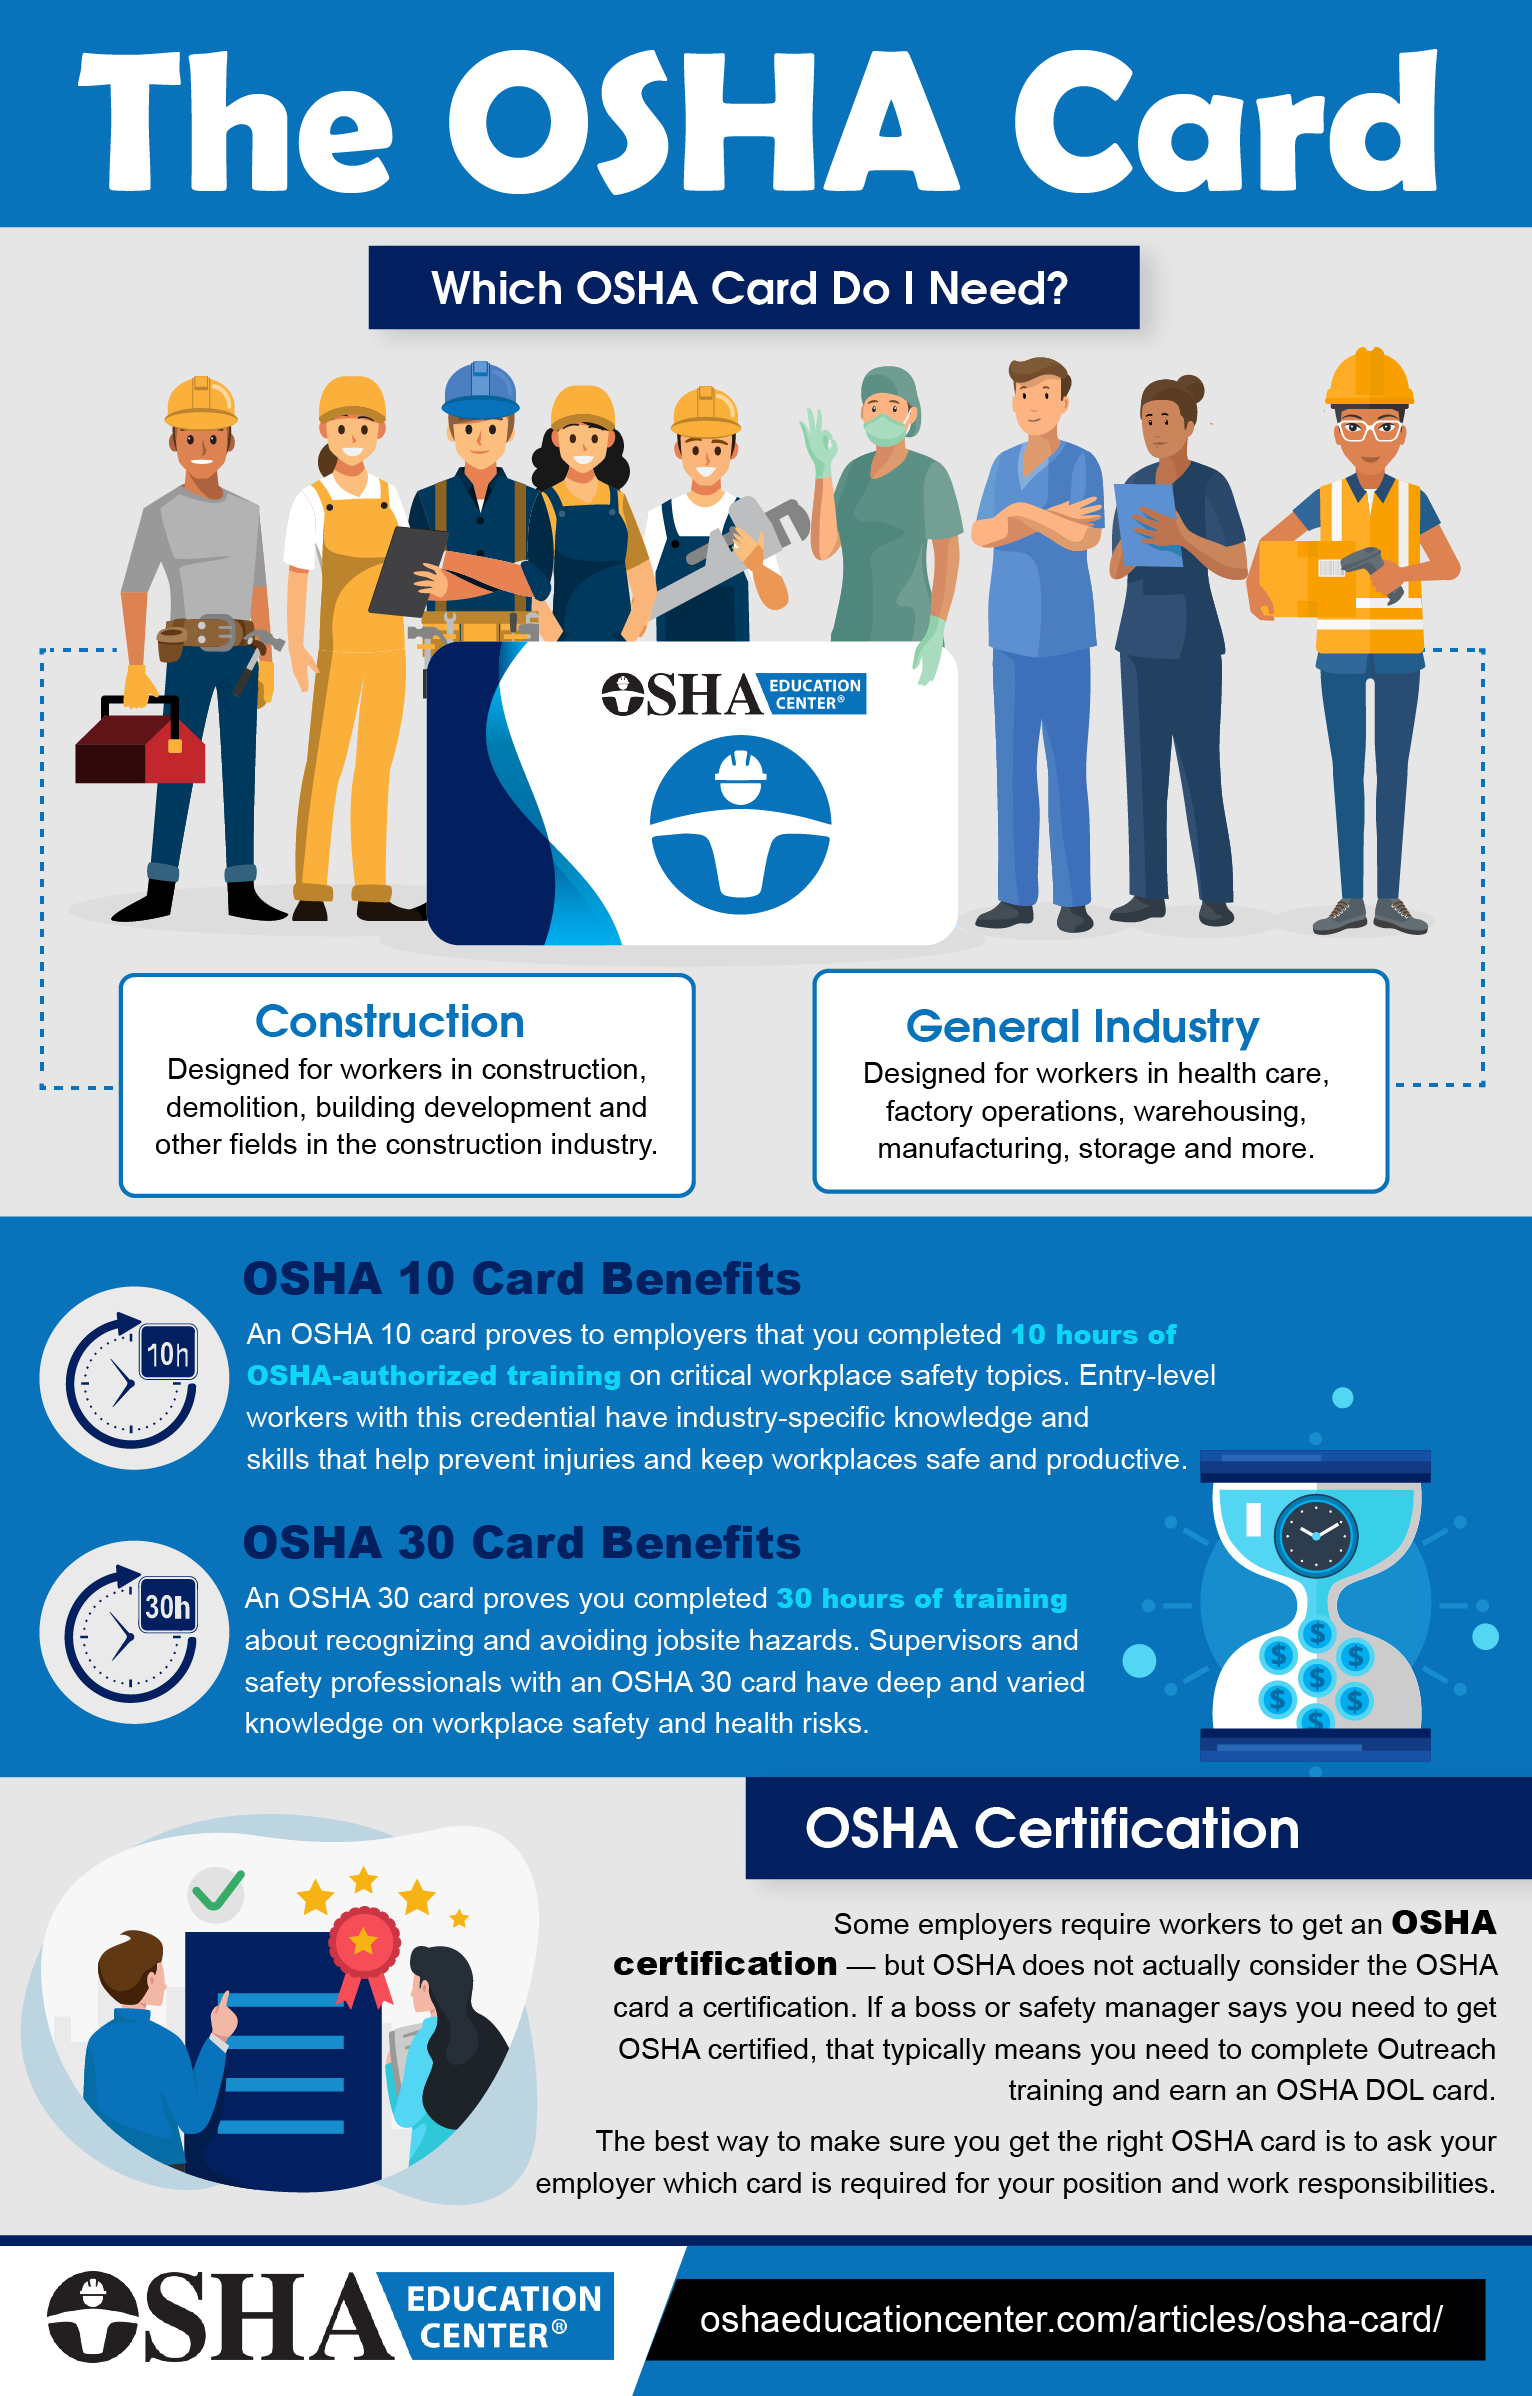 What We Can Expect from OSHA in 2016